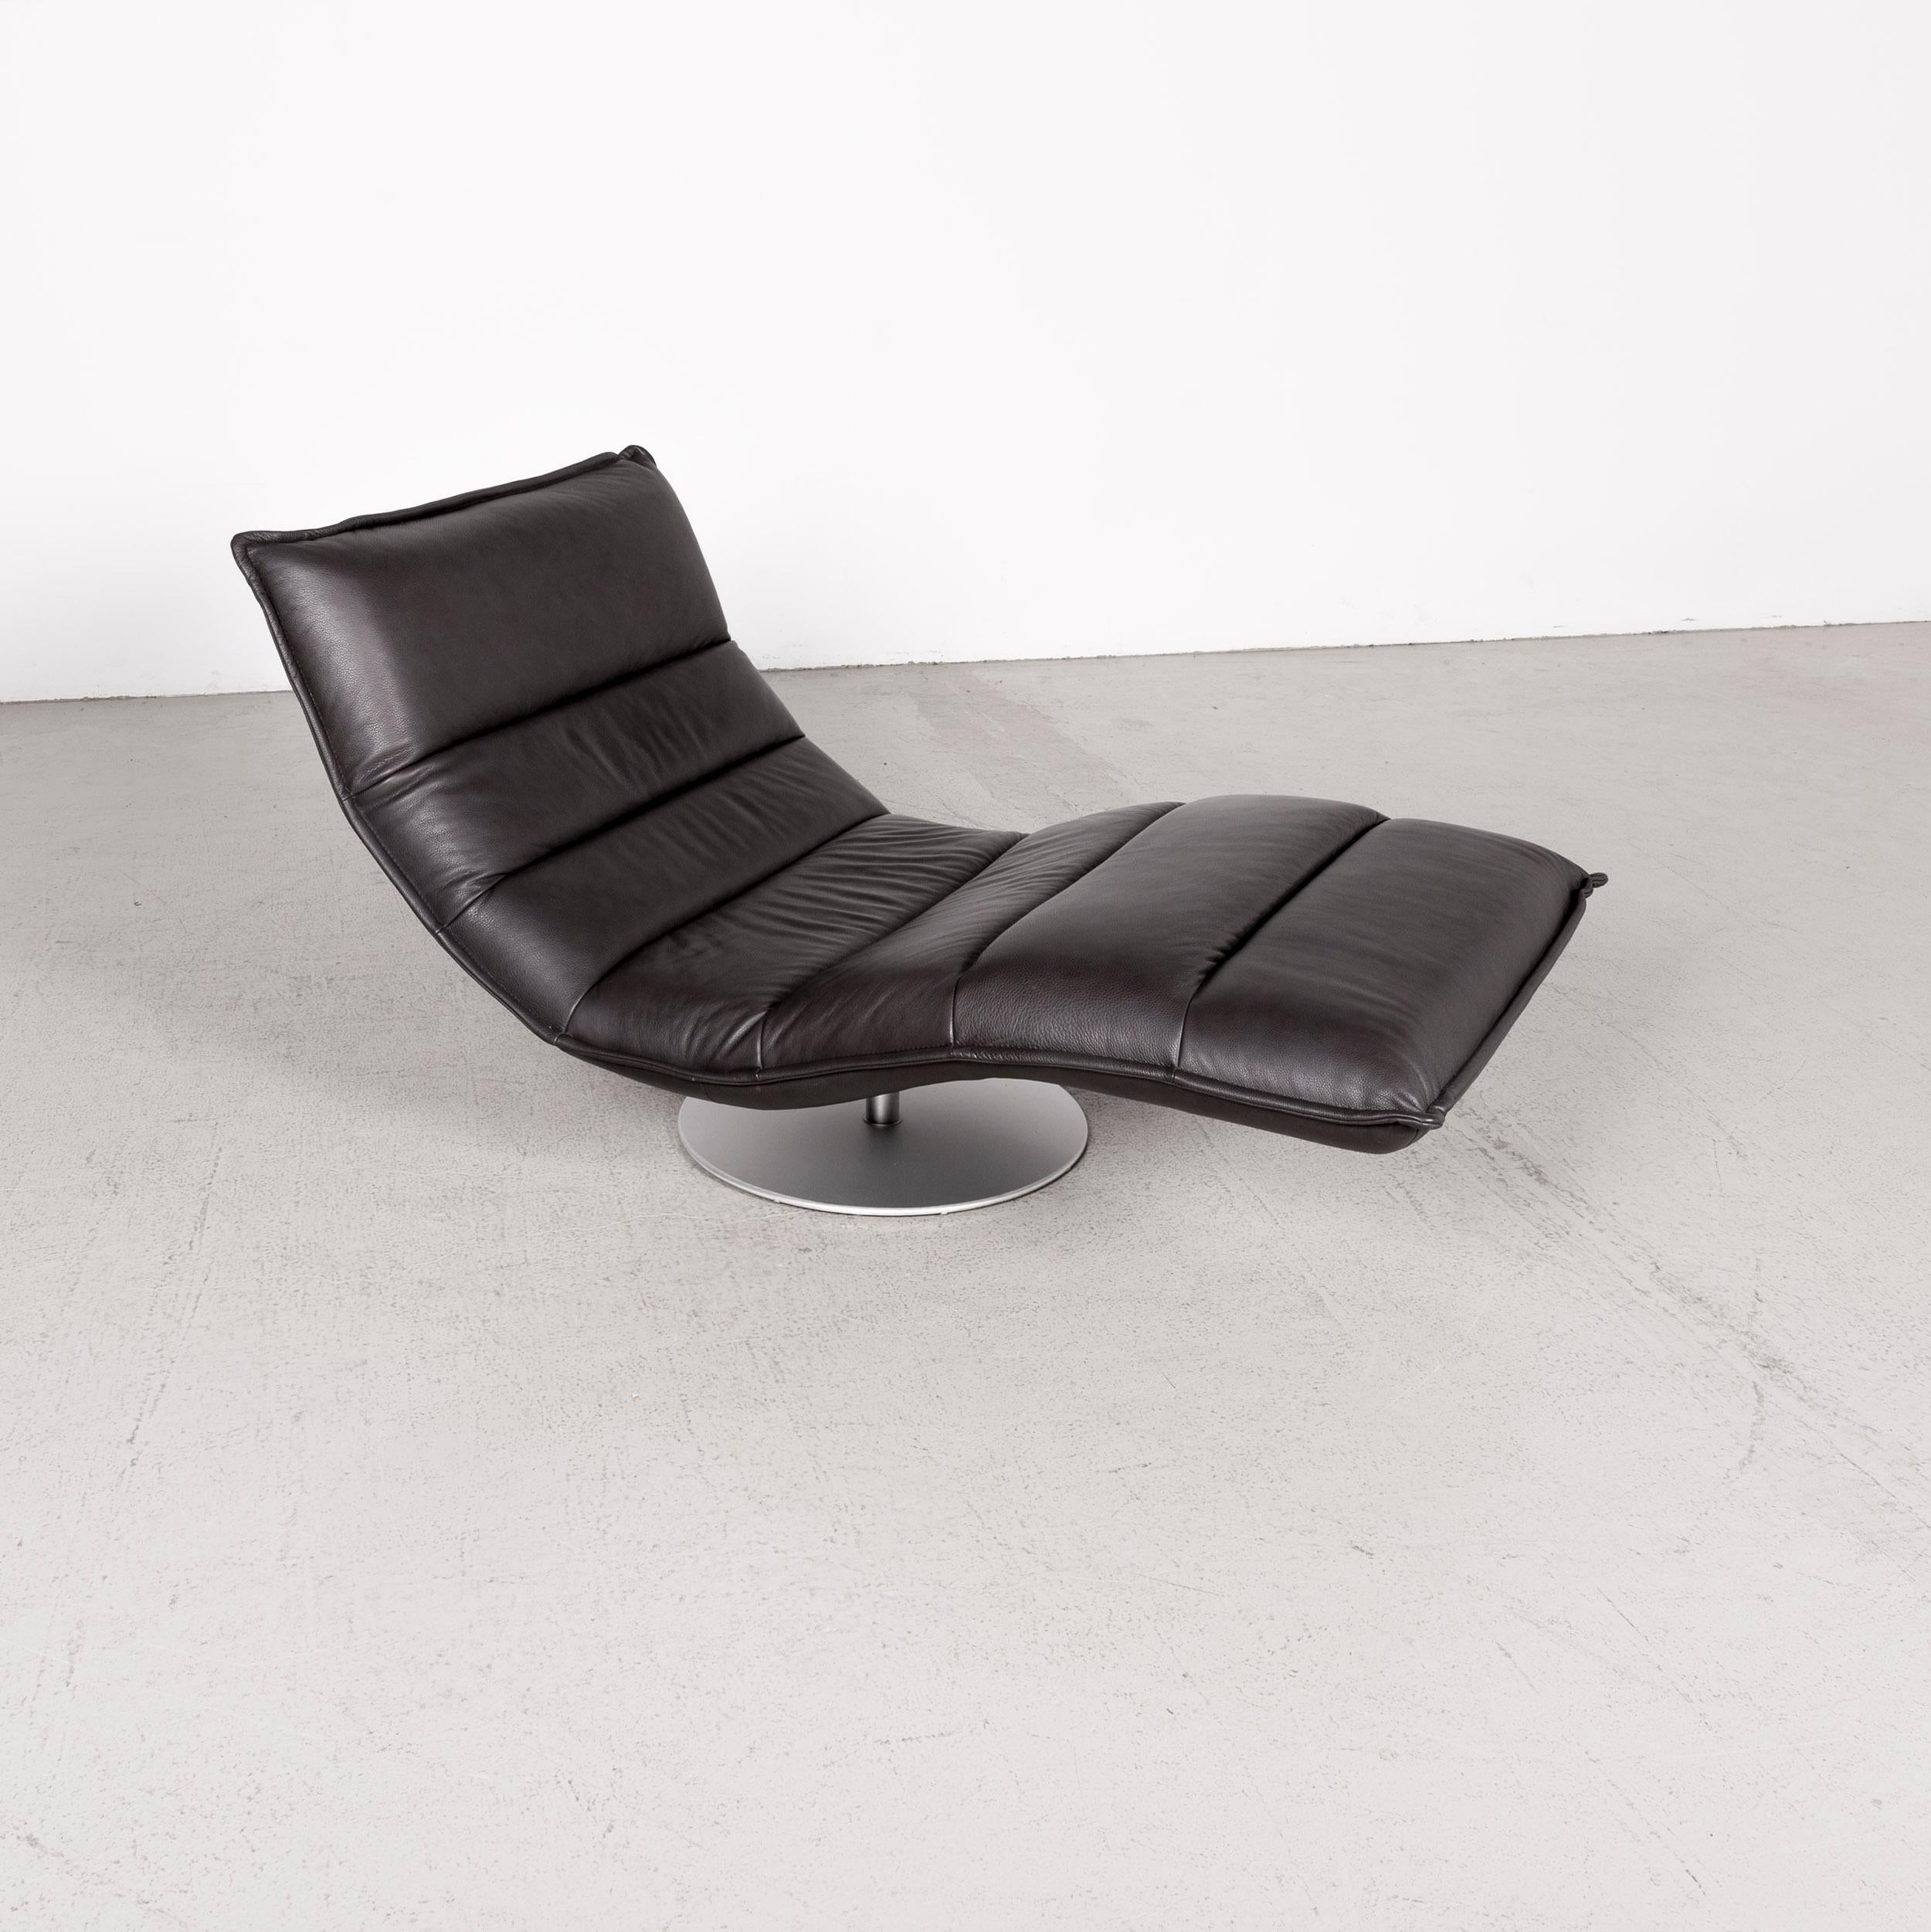 We bring to you a Willi Schillig Inkoognito leather lounger anthracite genuine leather.
 

Product measures in centimeters:

Depth: 100
Width: 175
Height: 90
Seat-height: 35
Rest-height: 
Seat-depth: 115
Seat-width: 100
Back-height: 75.